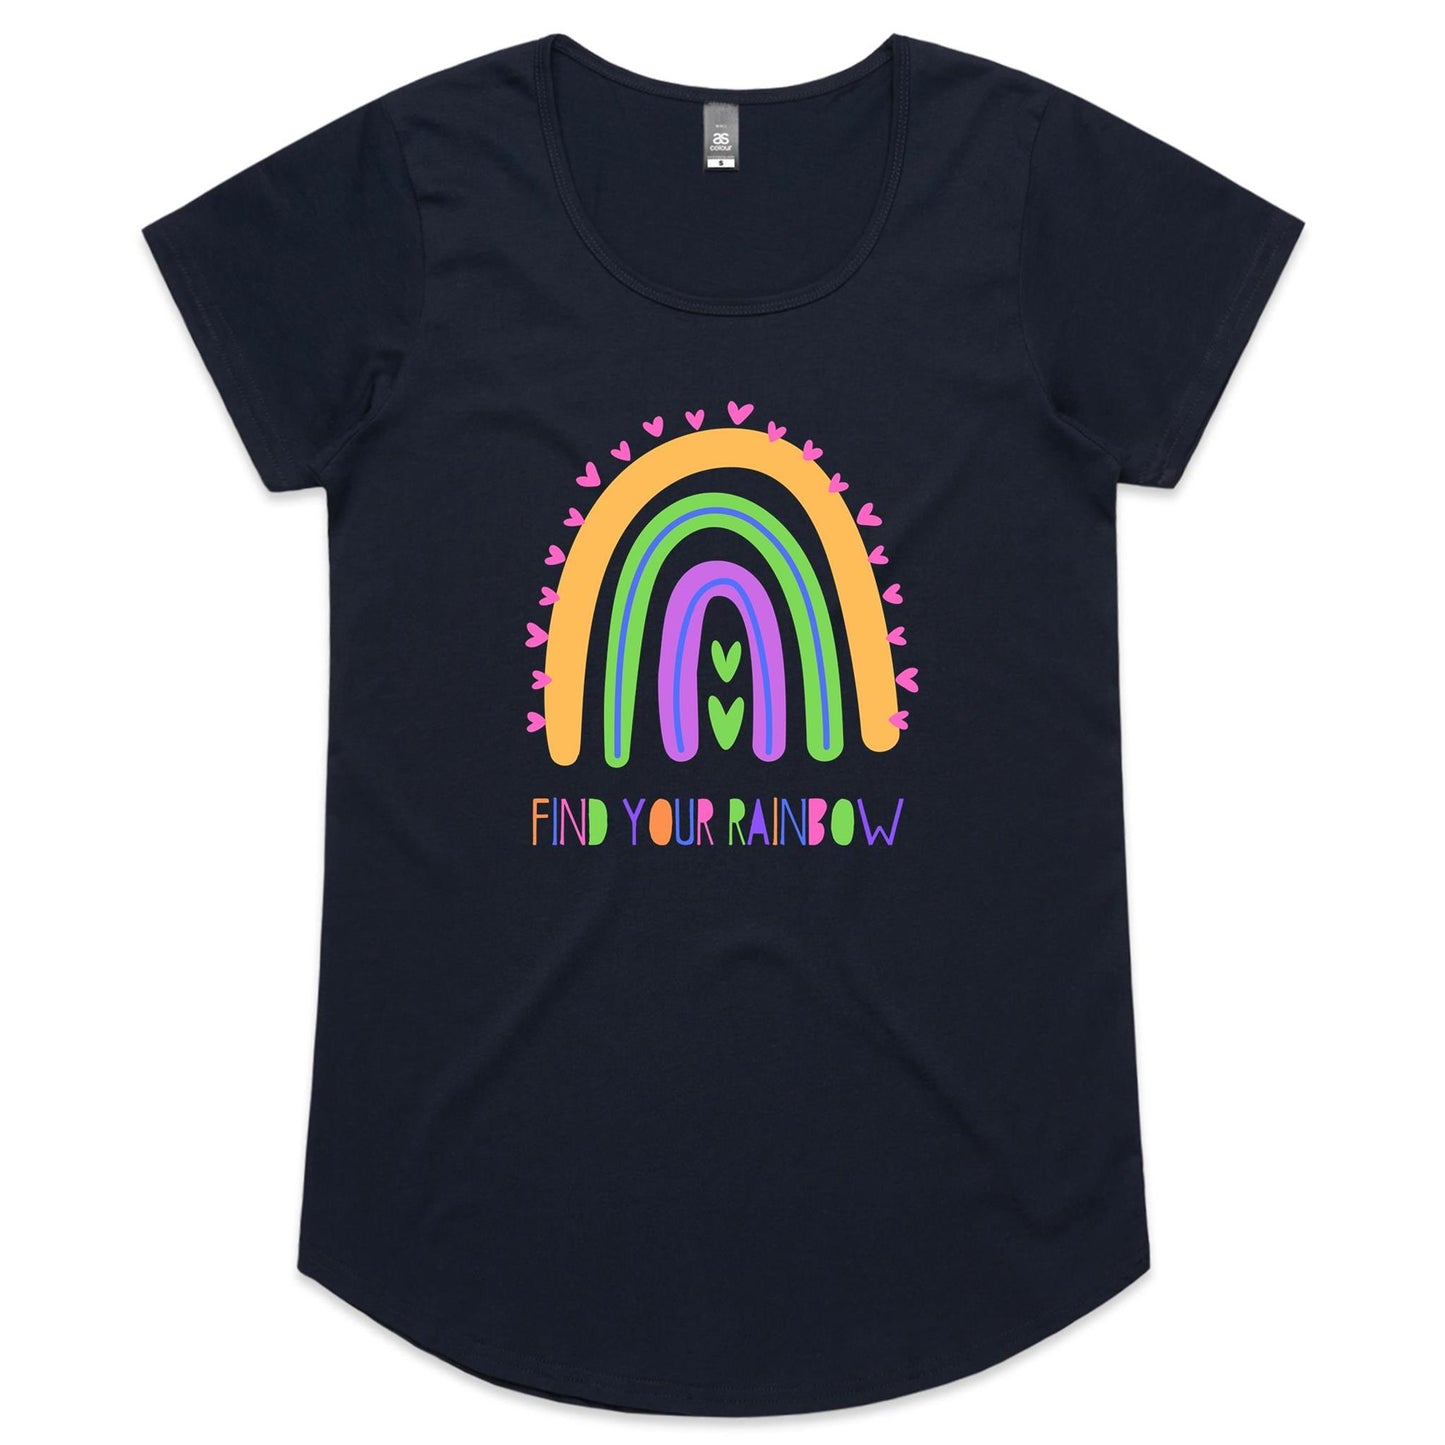 Find Your Rainbow - Womens Scoop Neck T-Shirt Navy Womens Scoop Neck T-shirt Womens